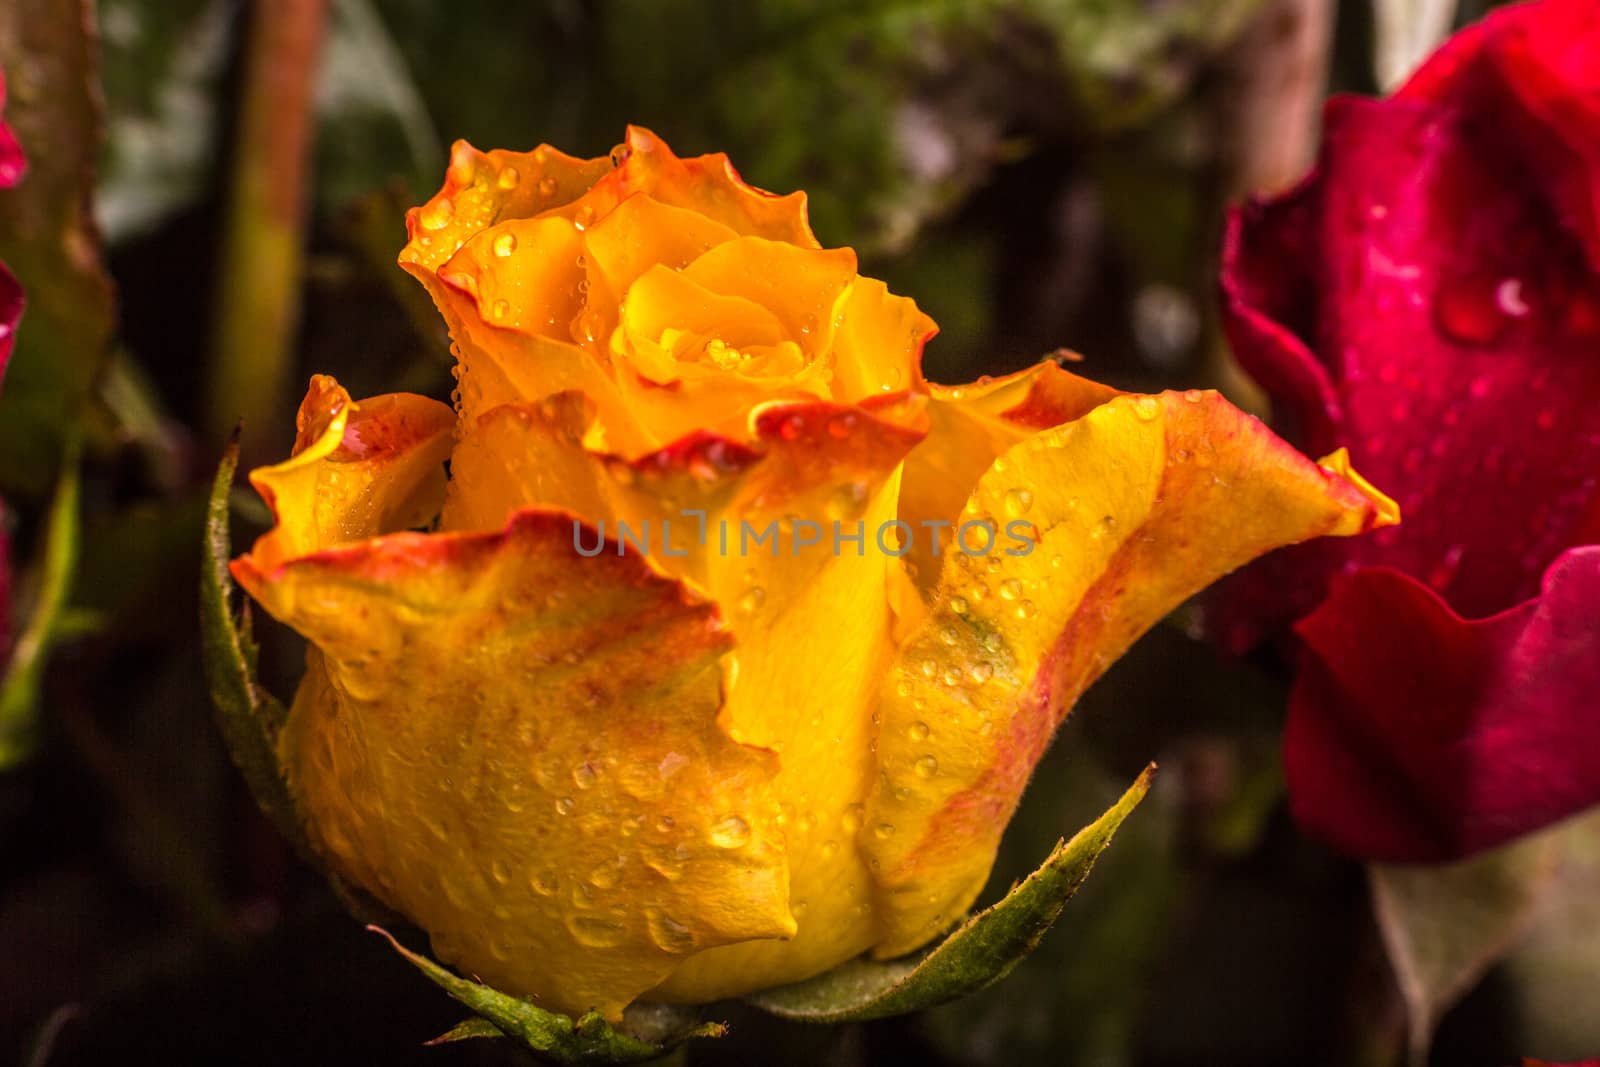 A closeup shot of a beautiful yellow and red colored rose